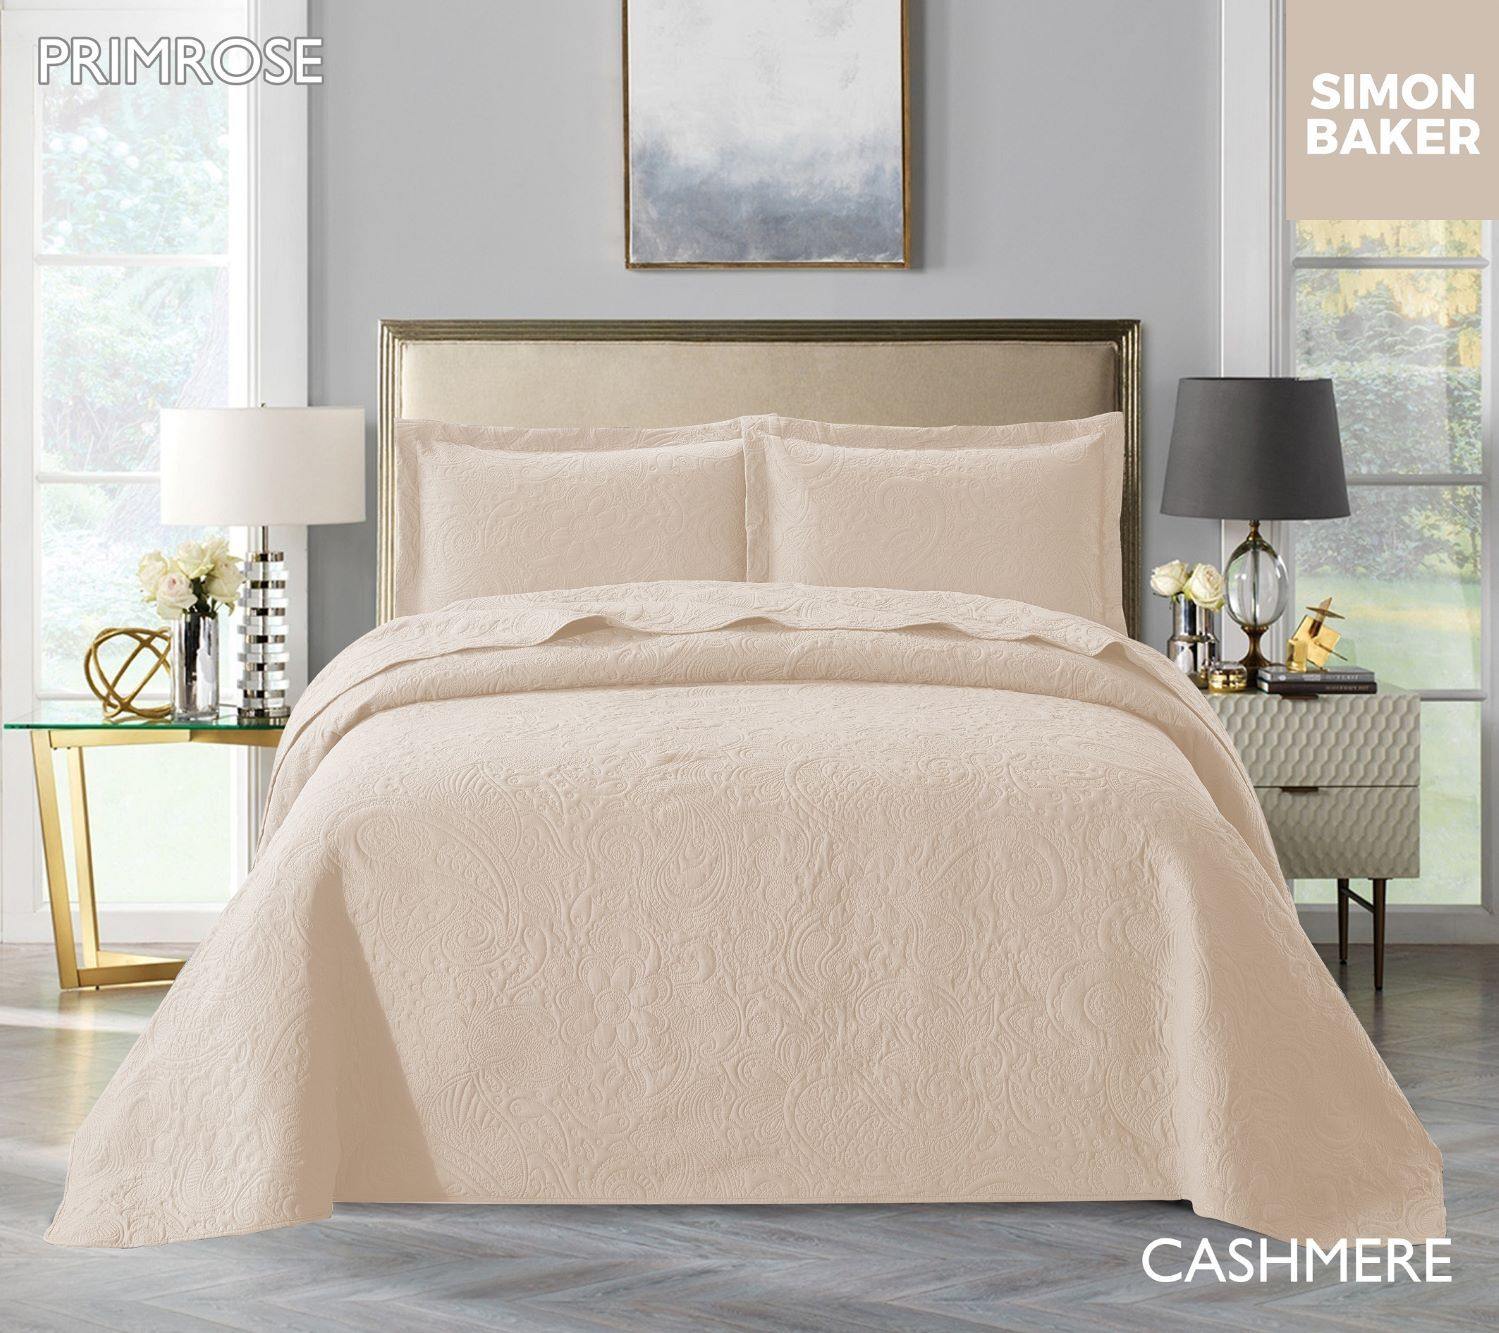 Simon Baker | Primrose Quilted Bedspread Cashmere (Various Sizes)